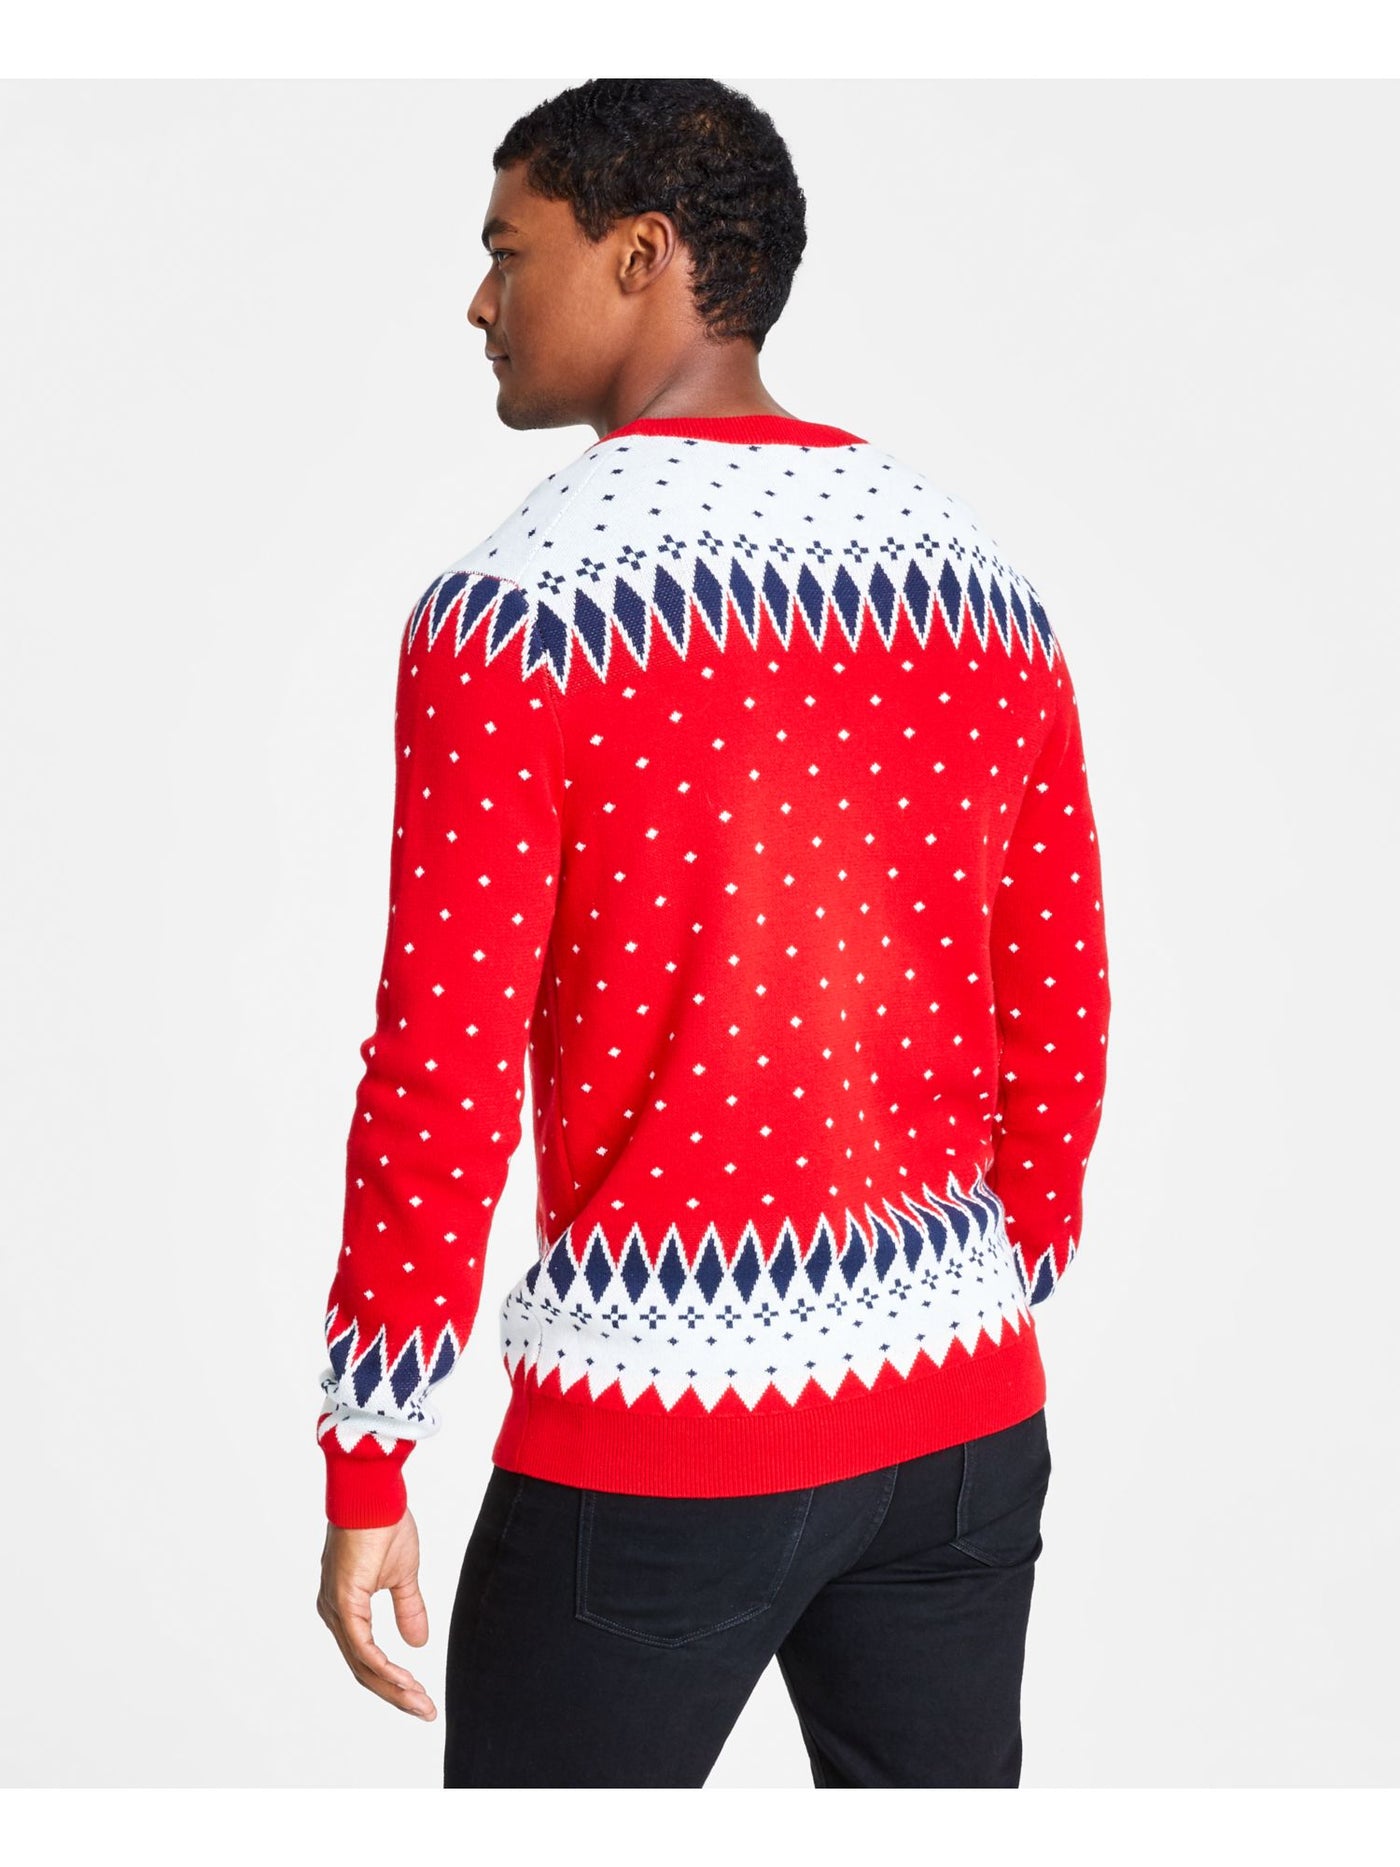 CHARTER CLUB Mens Red Patterned Long Sleeve Crew Neck Cotton Blend Pullover Sweater L